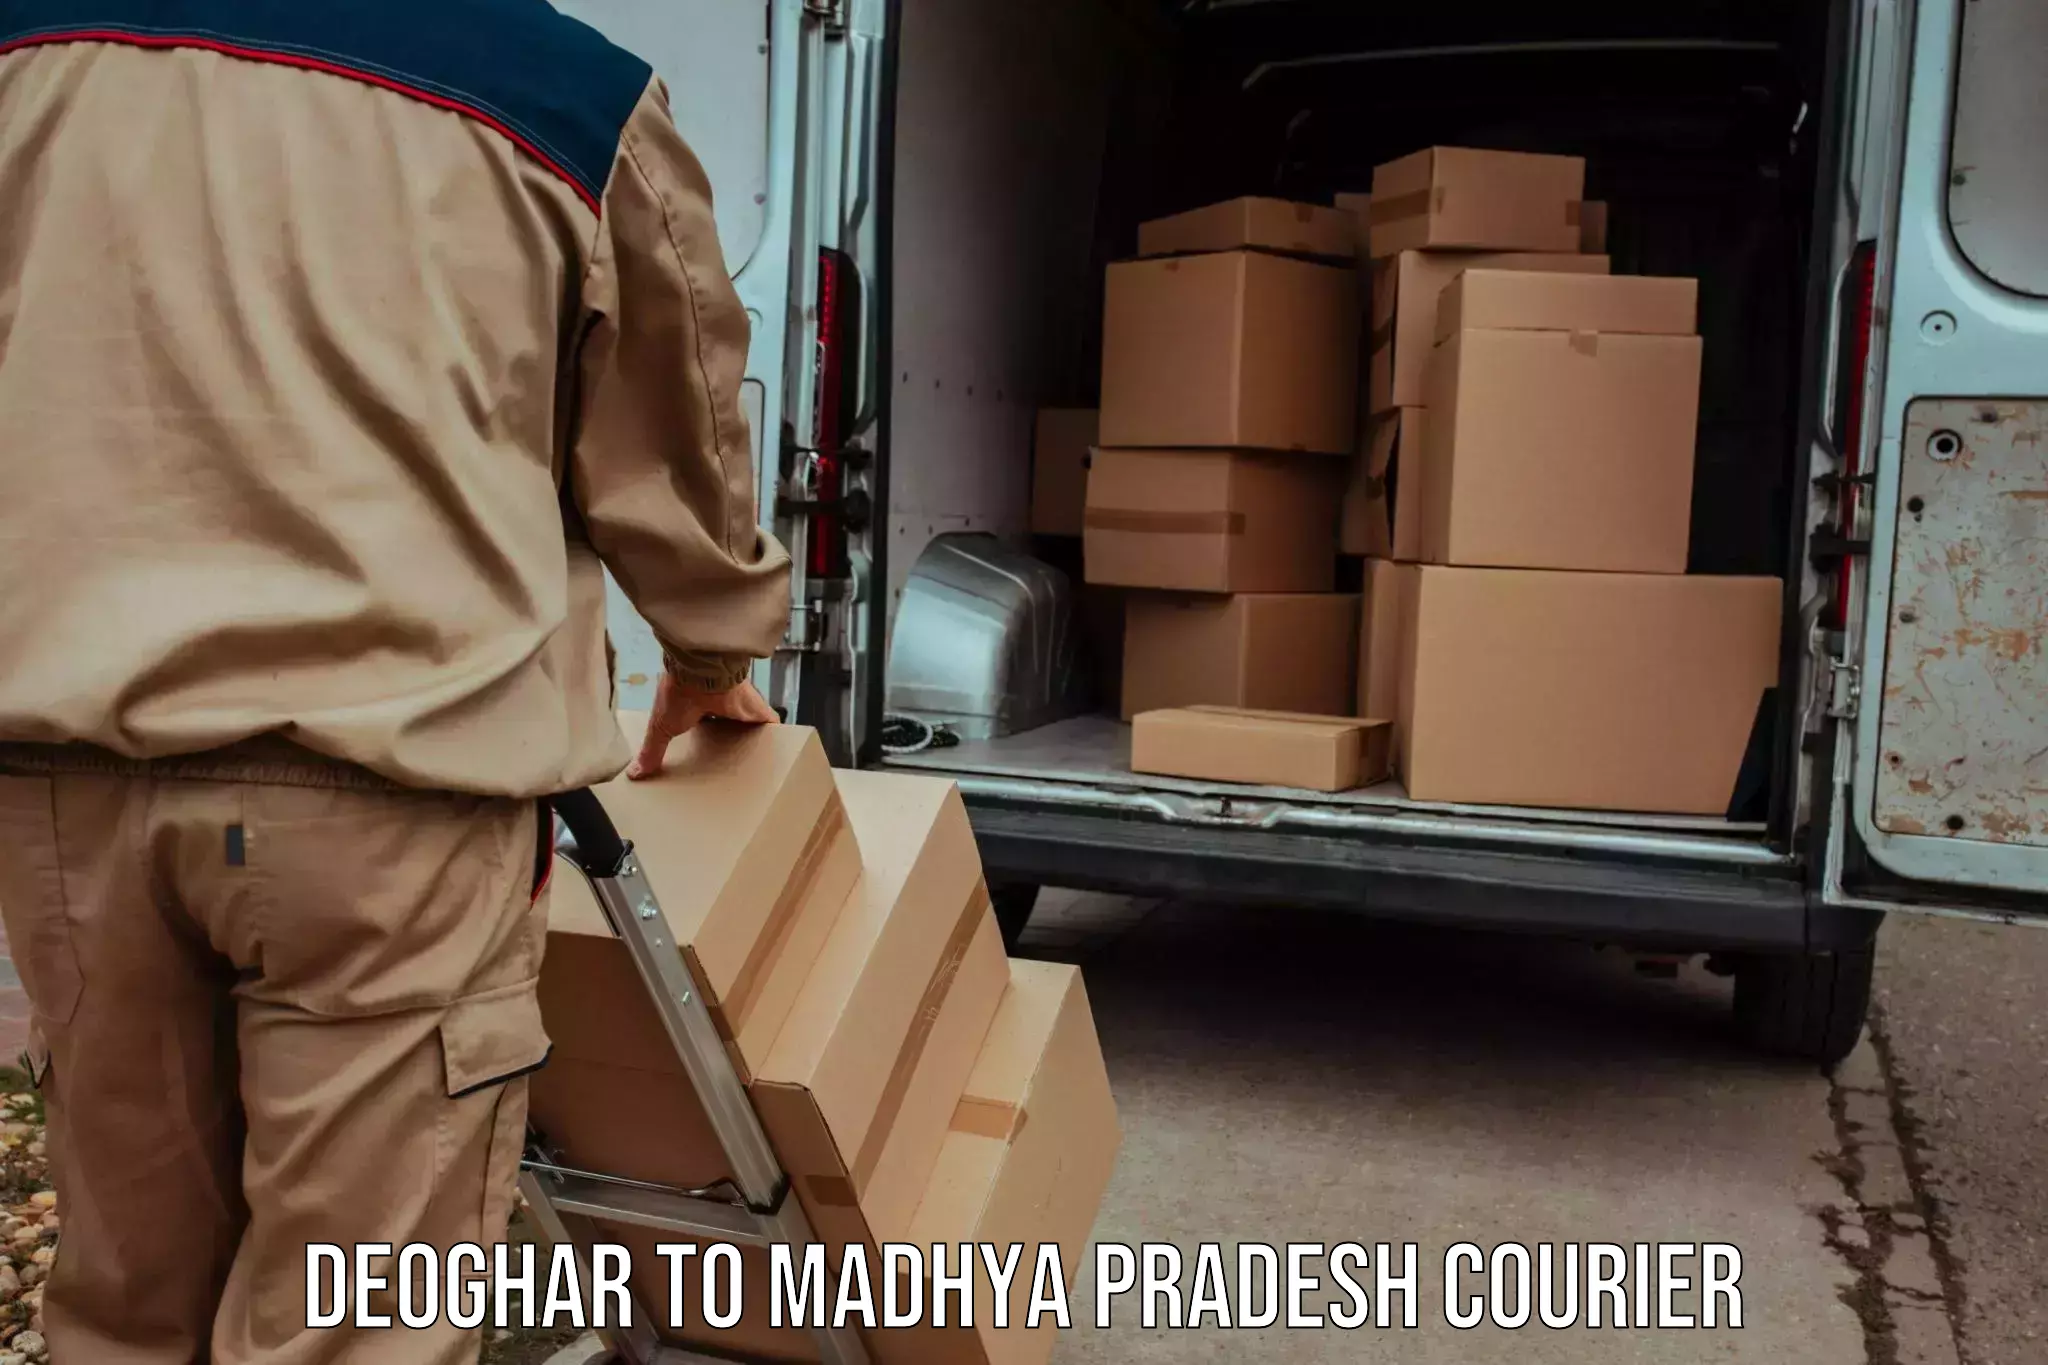 Easy access courier services Deoghar to Hoshangabad